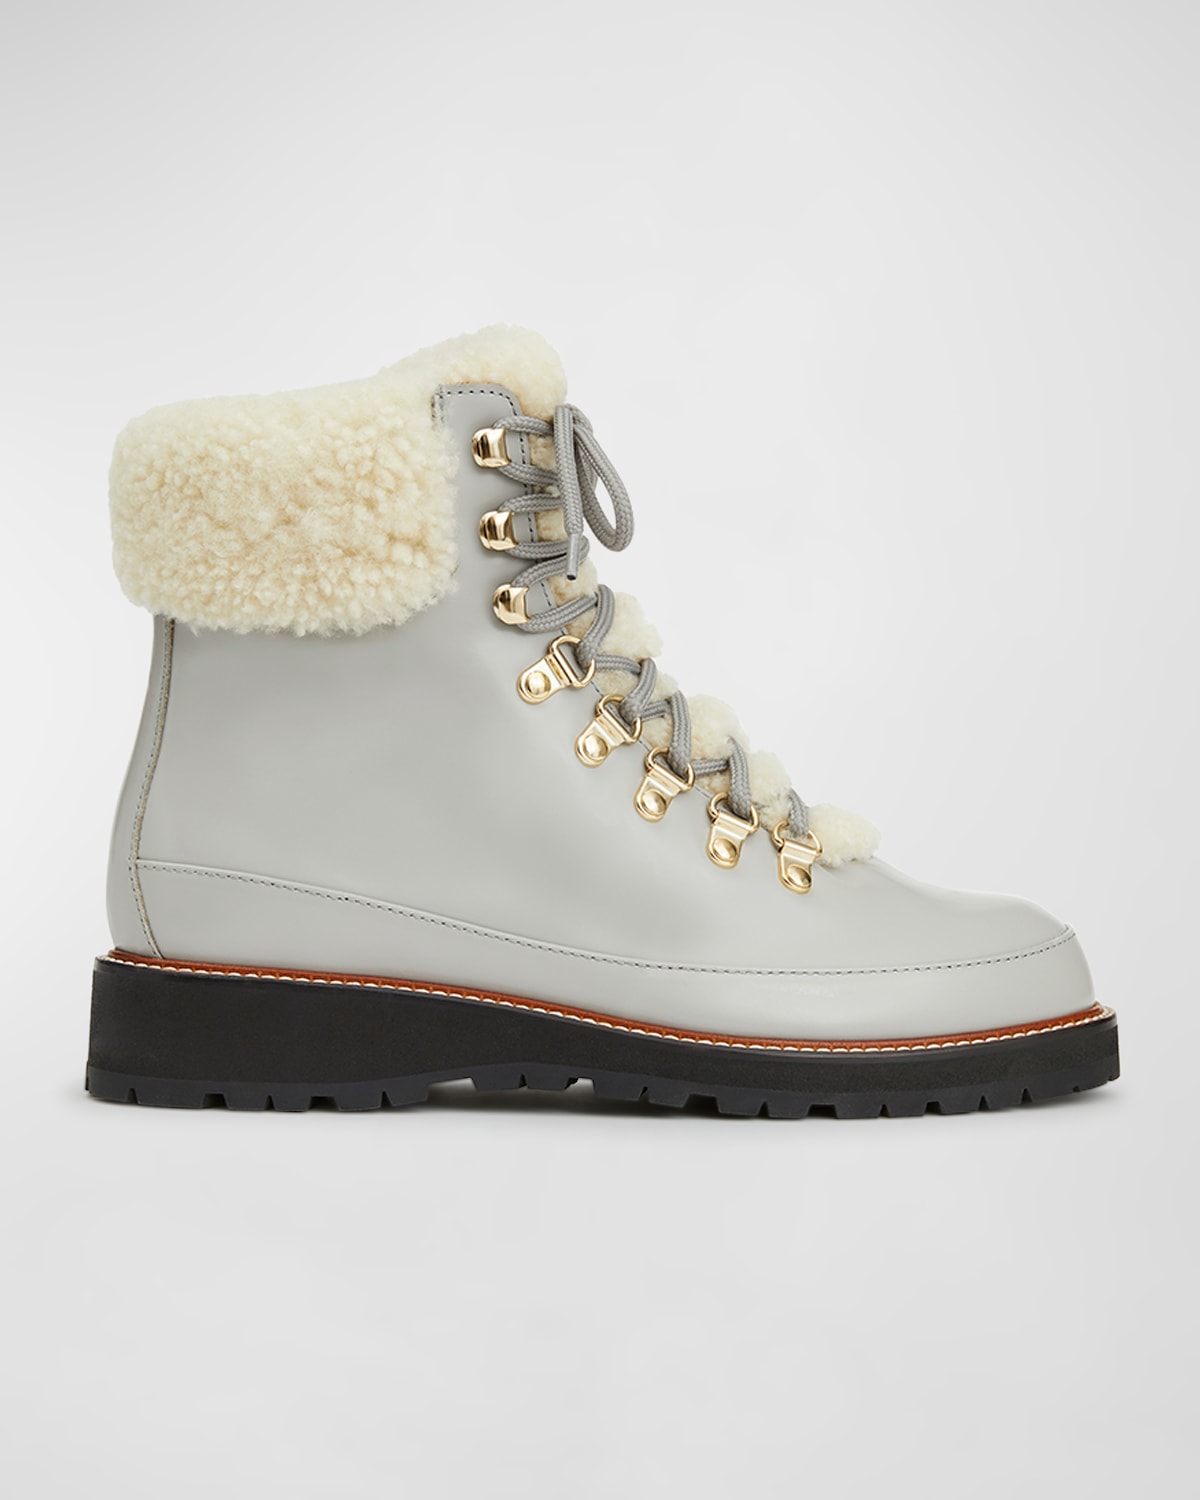 Brushed Leather Lace-Up Lug Sole Boots with Shearling